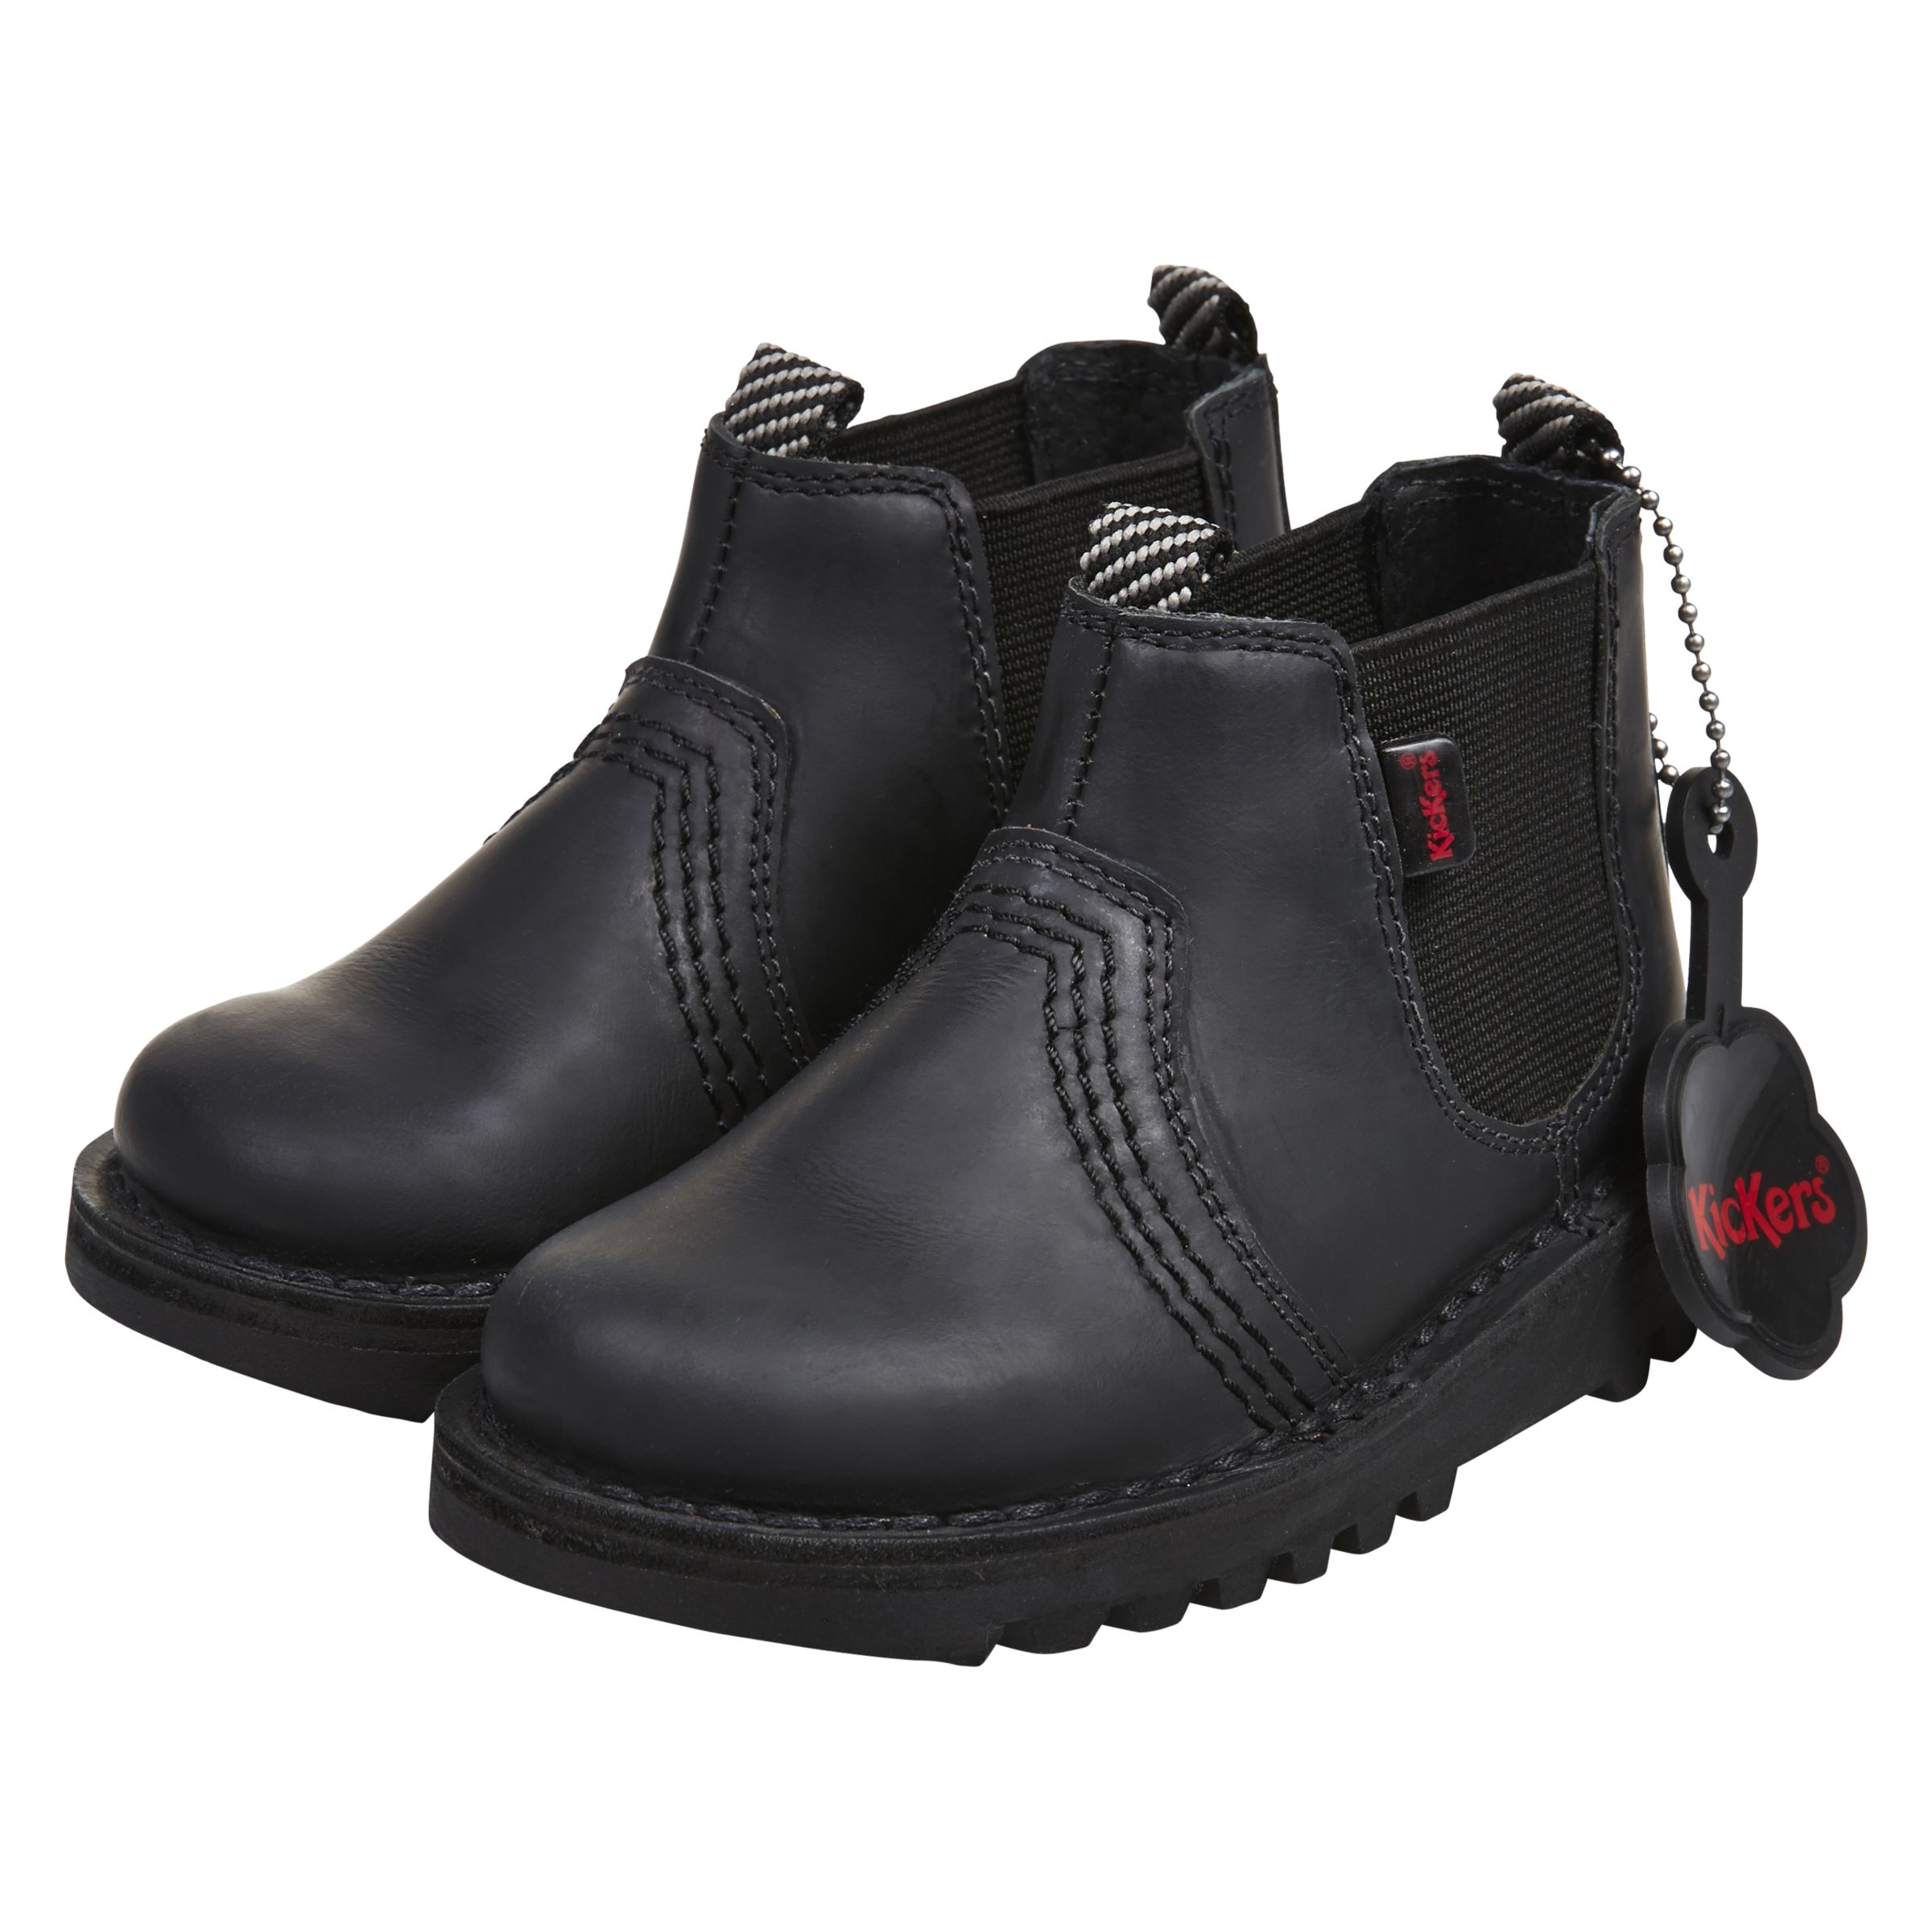 Kickers Children's Chelsea Boots, Black Leather